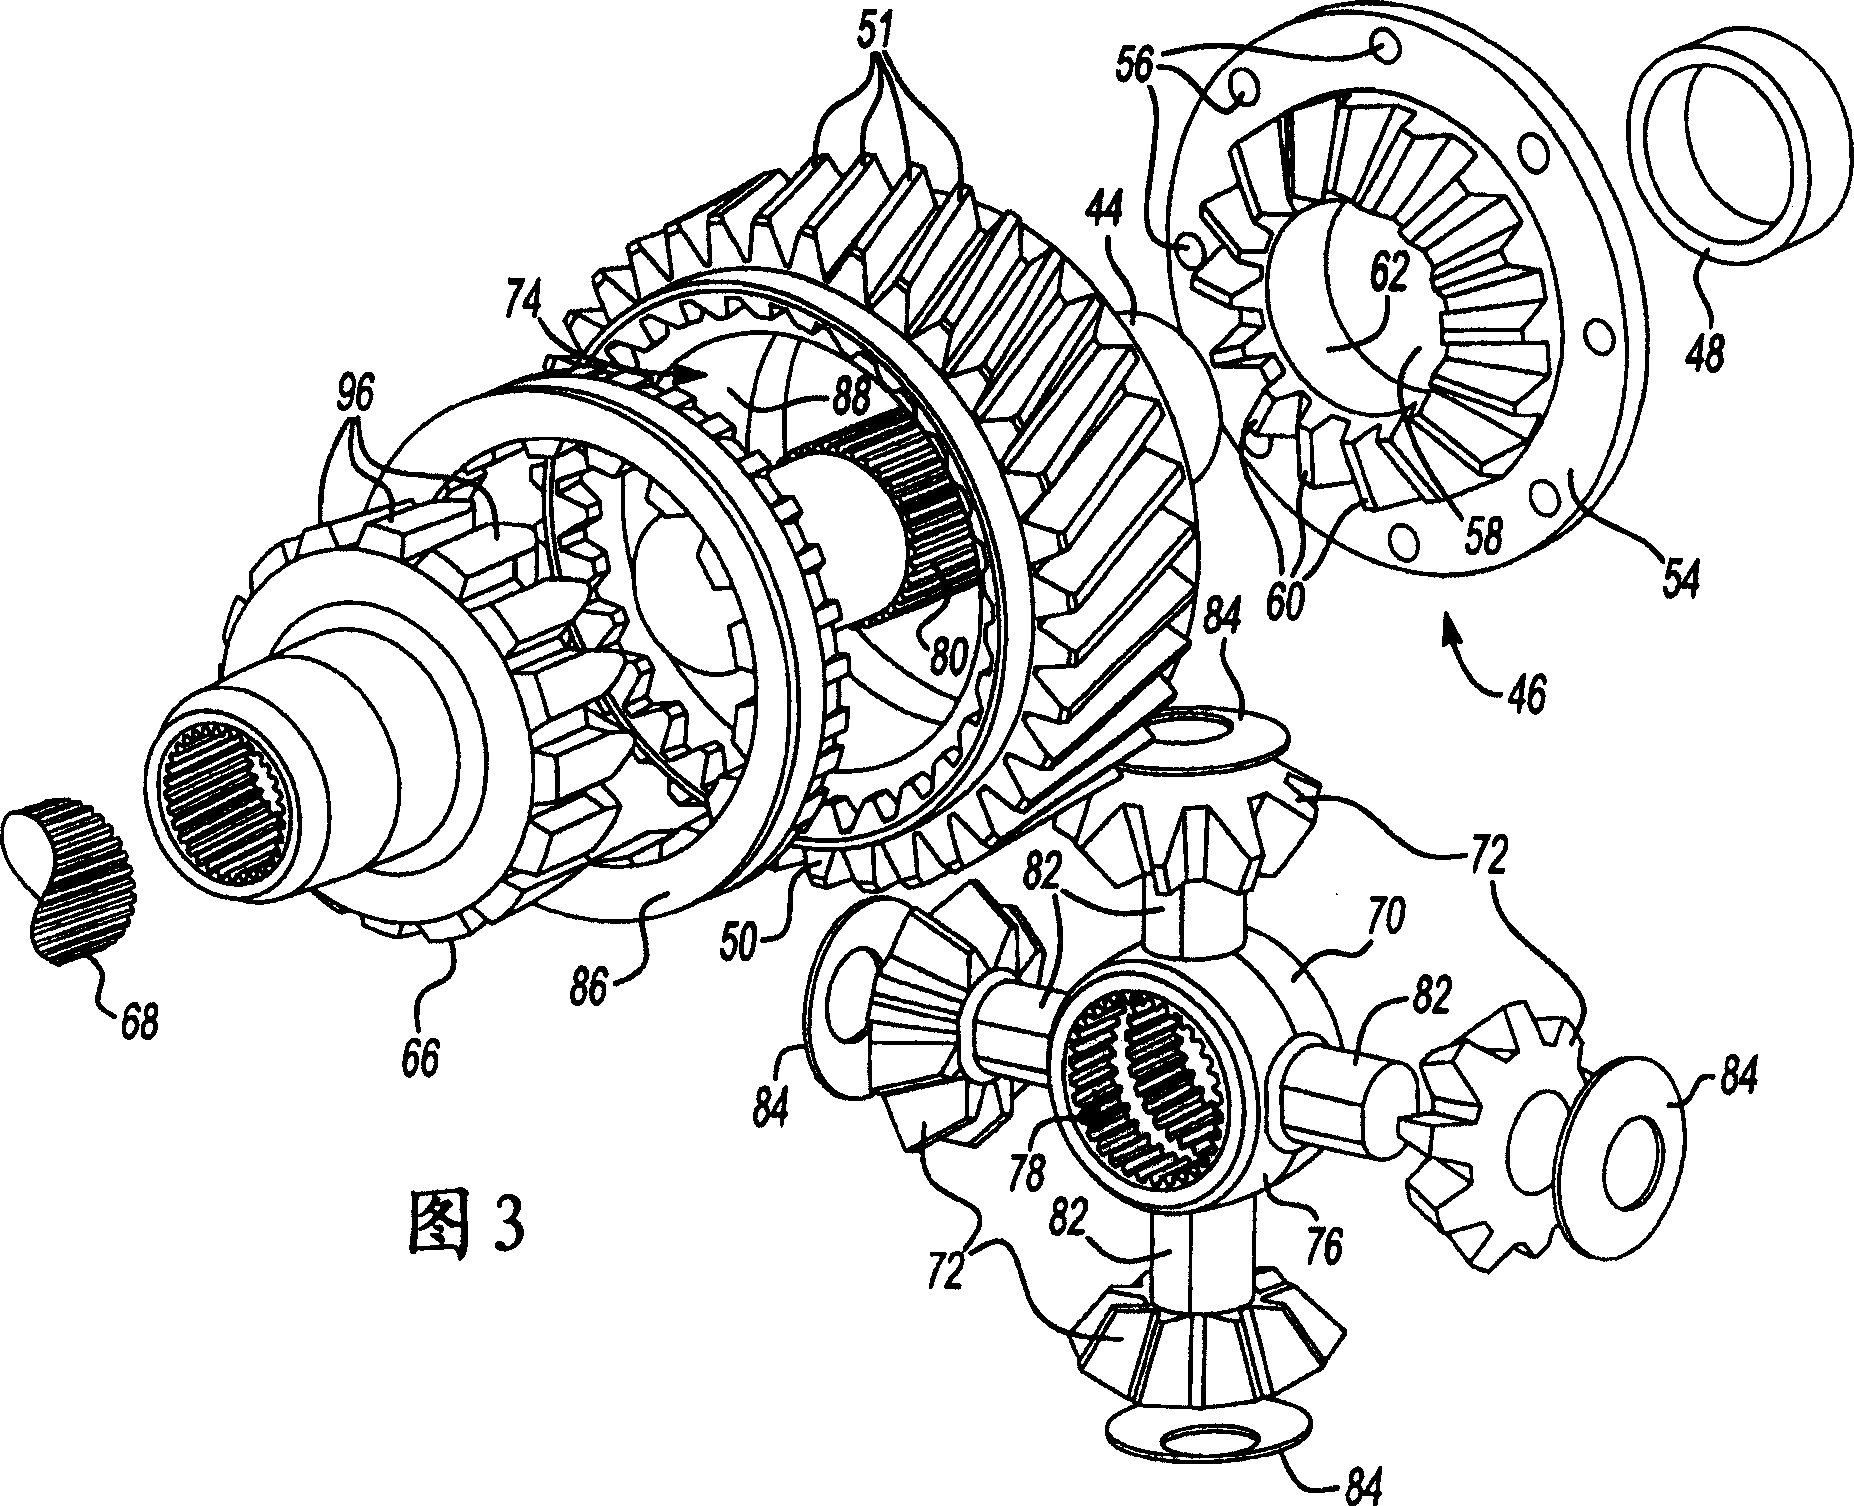 Inter-axle differential assembly